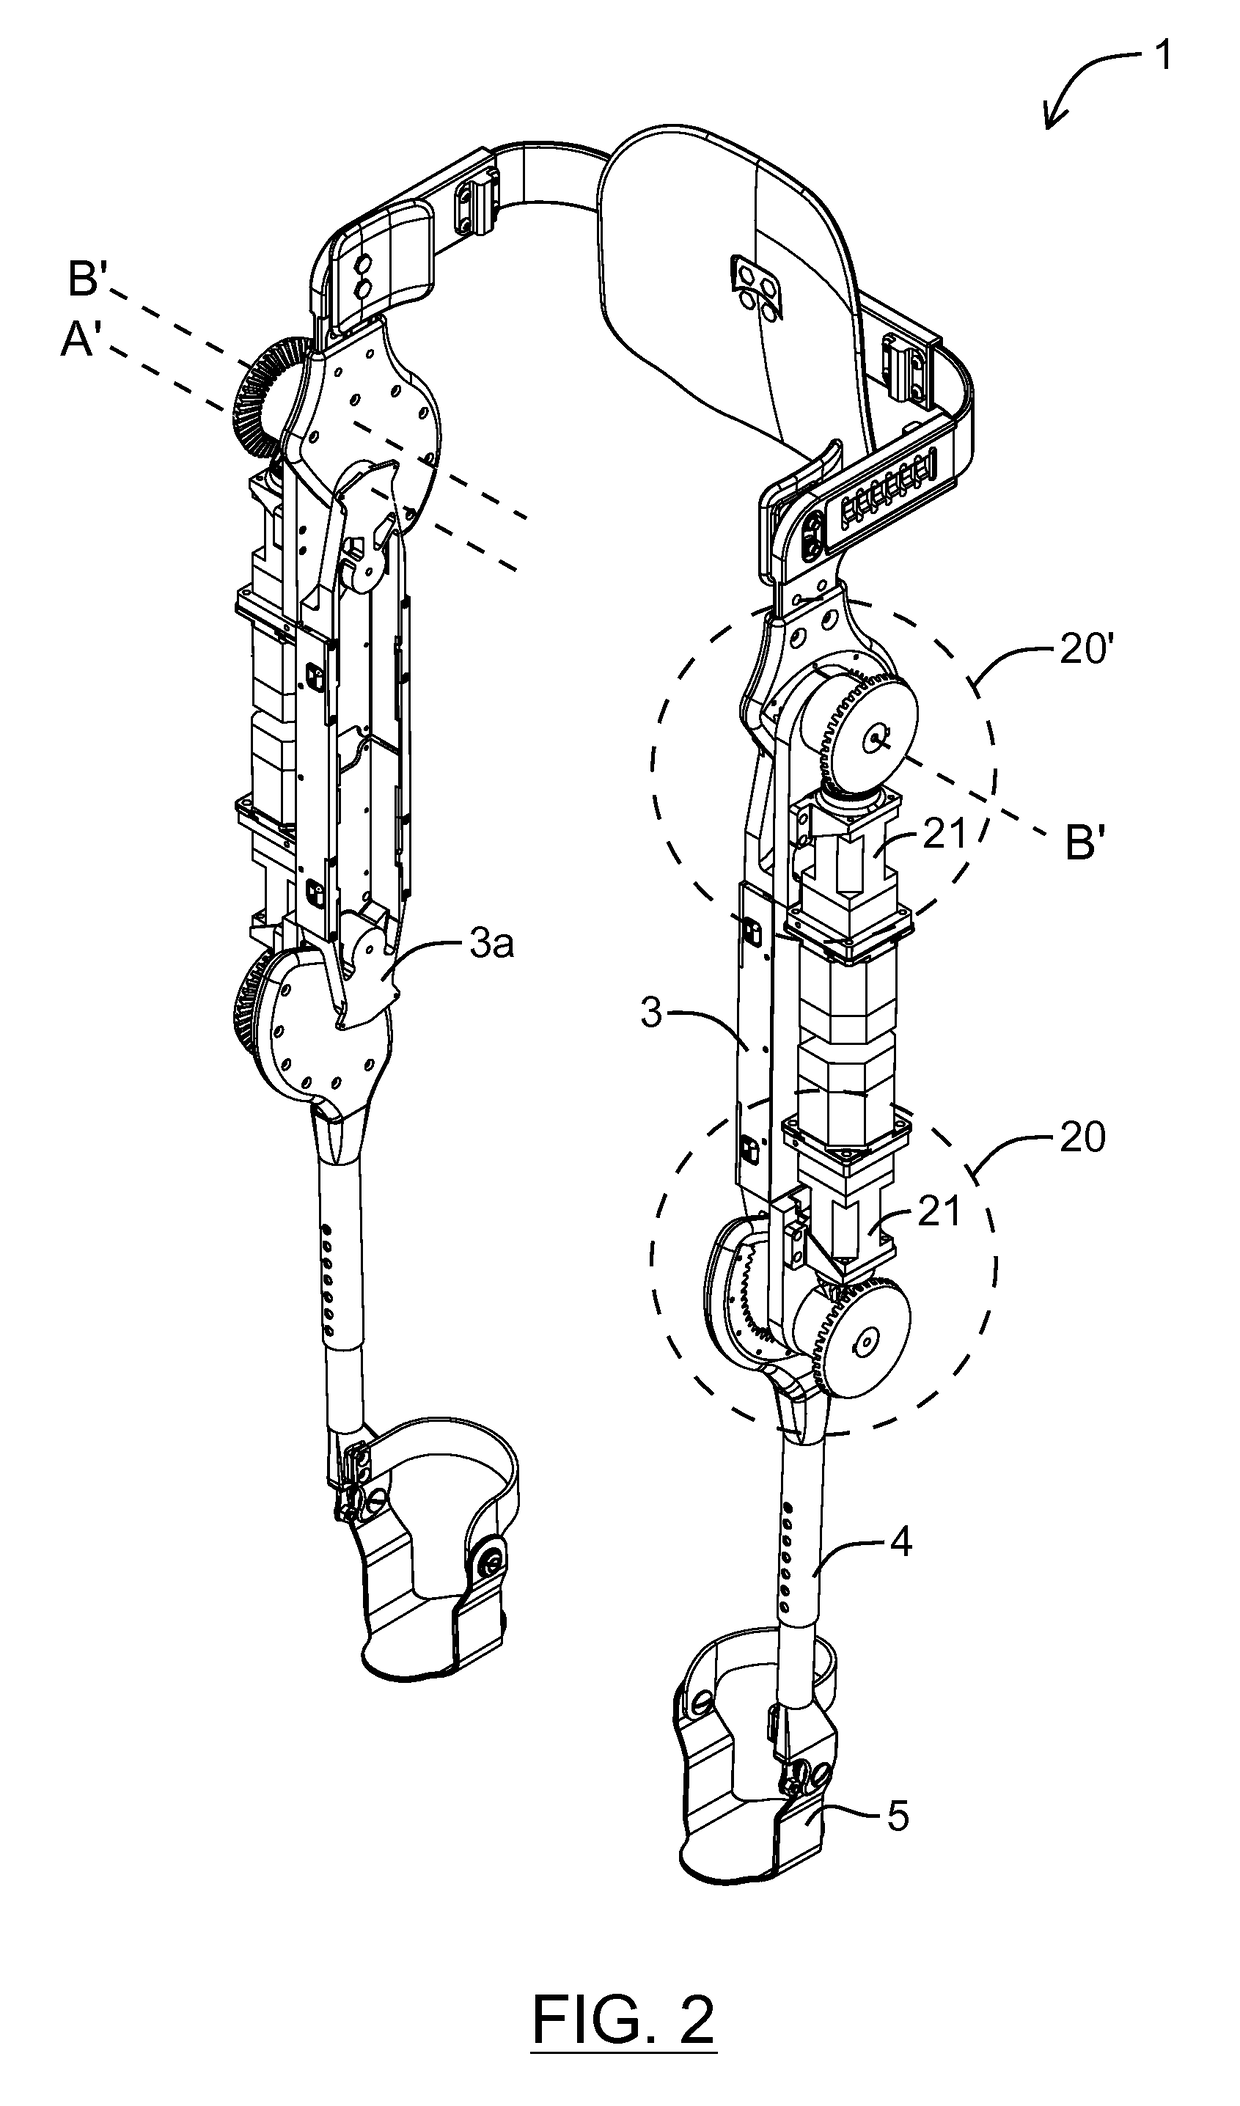 Foot plate assembly for use in an exoskeleton apparatus